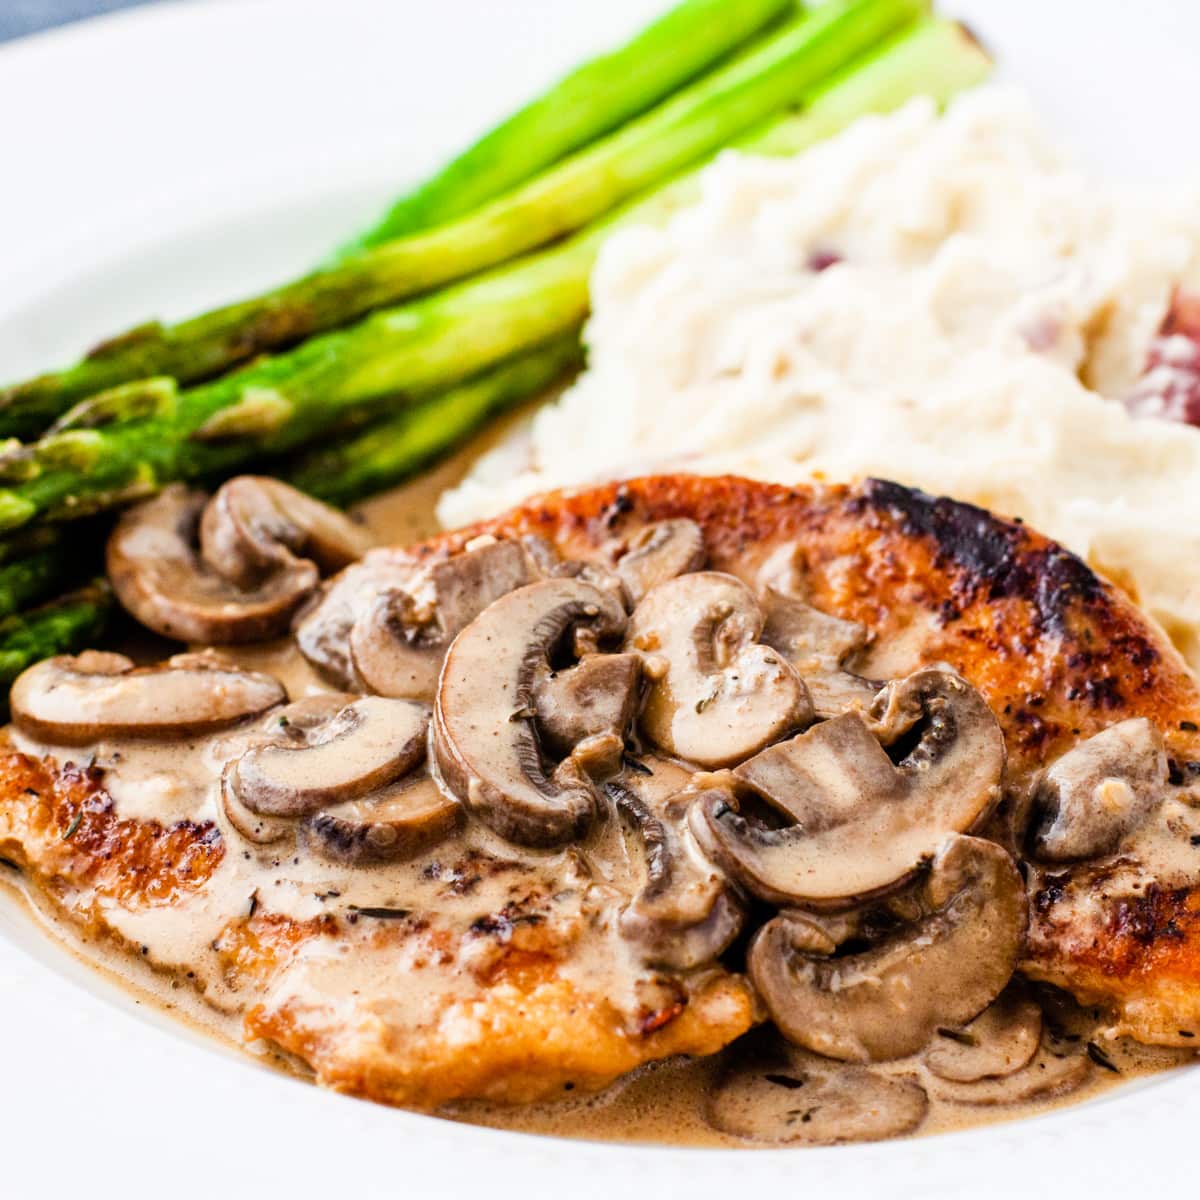 Close up image of a serving of chicken marsala showing golden brown chicken smothered in a creamy mushroom marsala sauce.